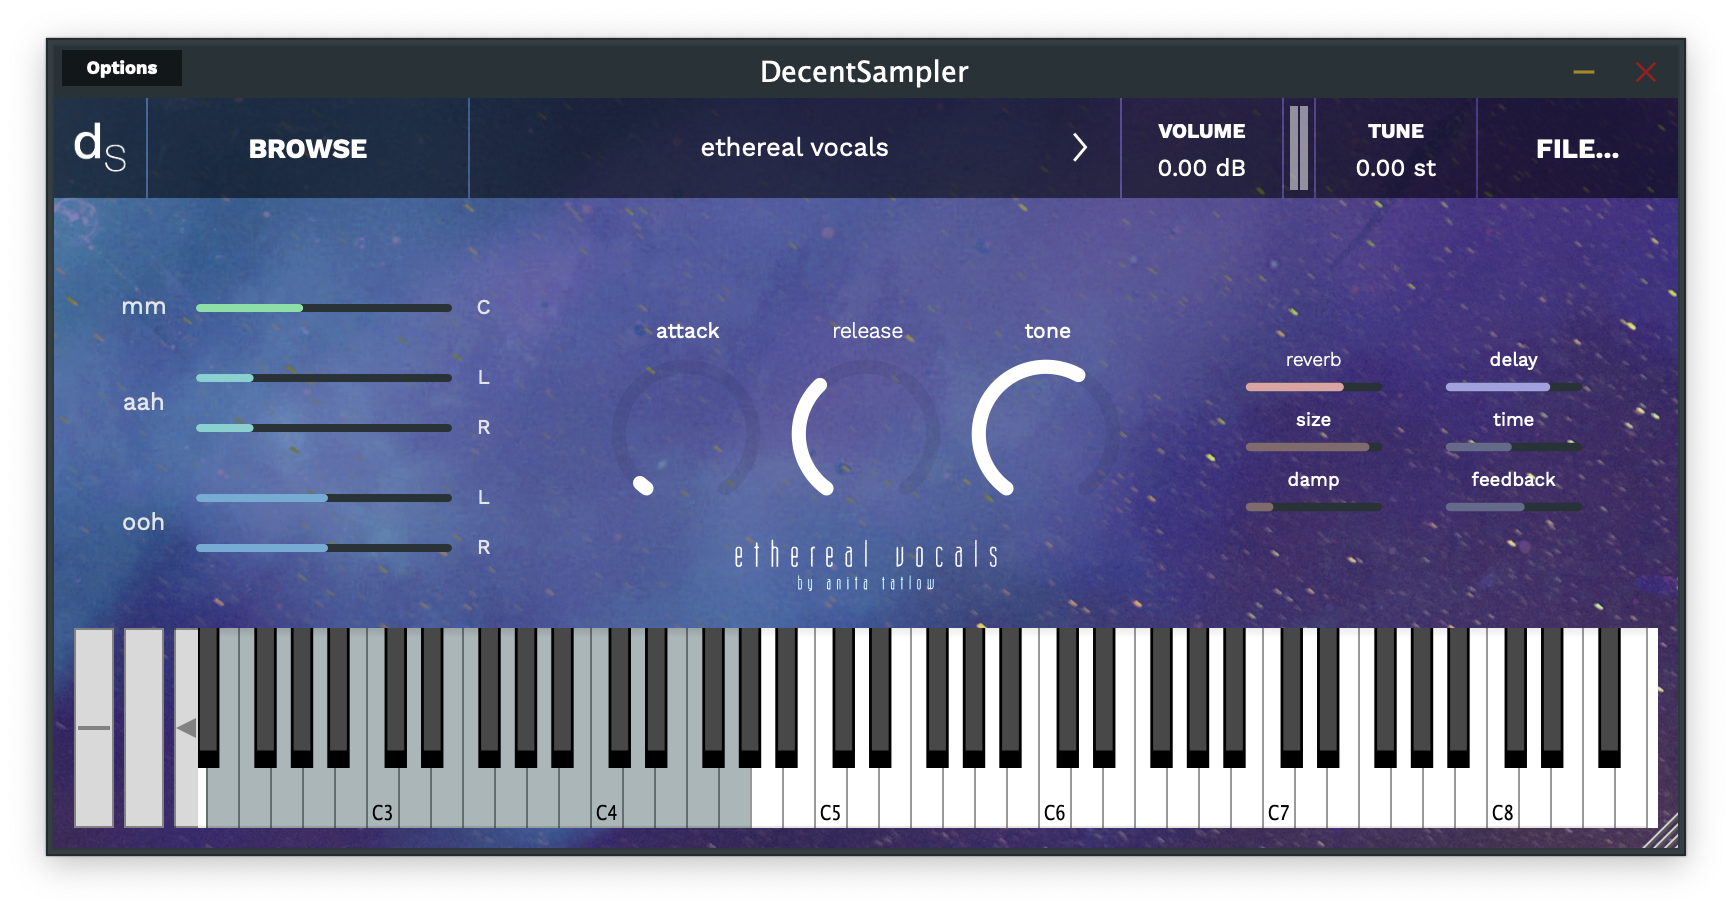 User interface for "ethereal vocals" sample library